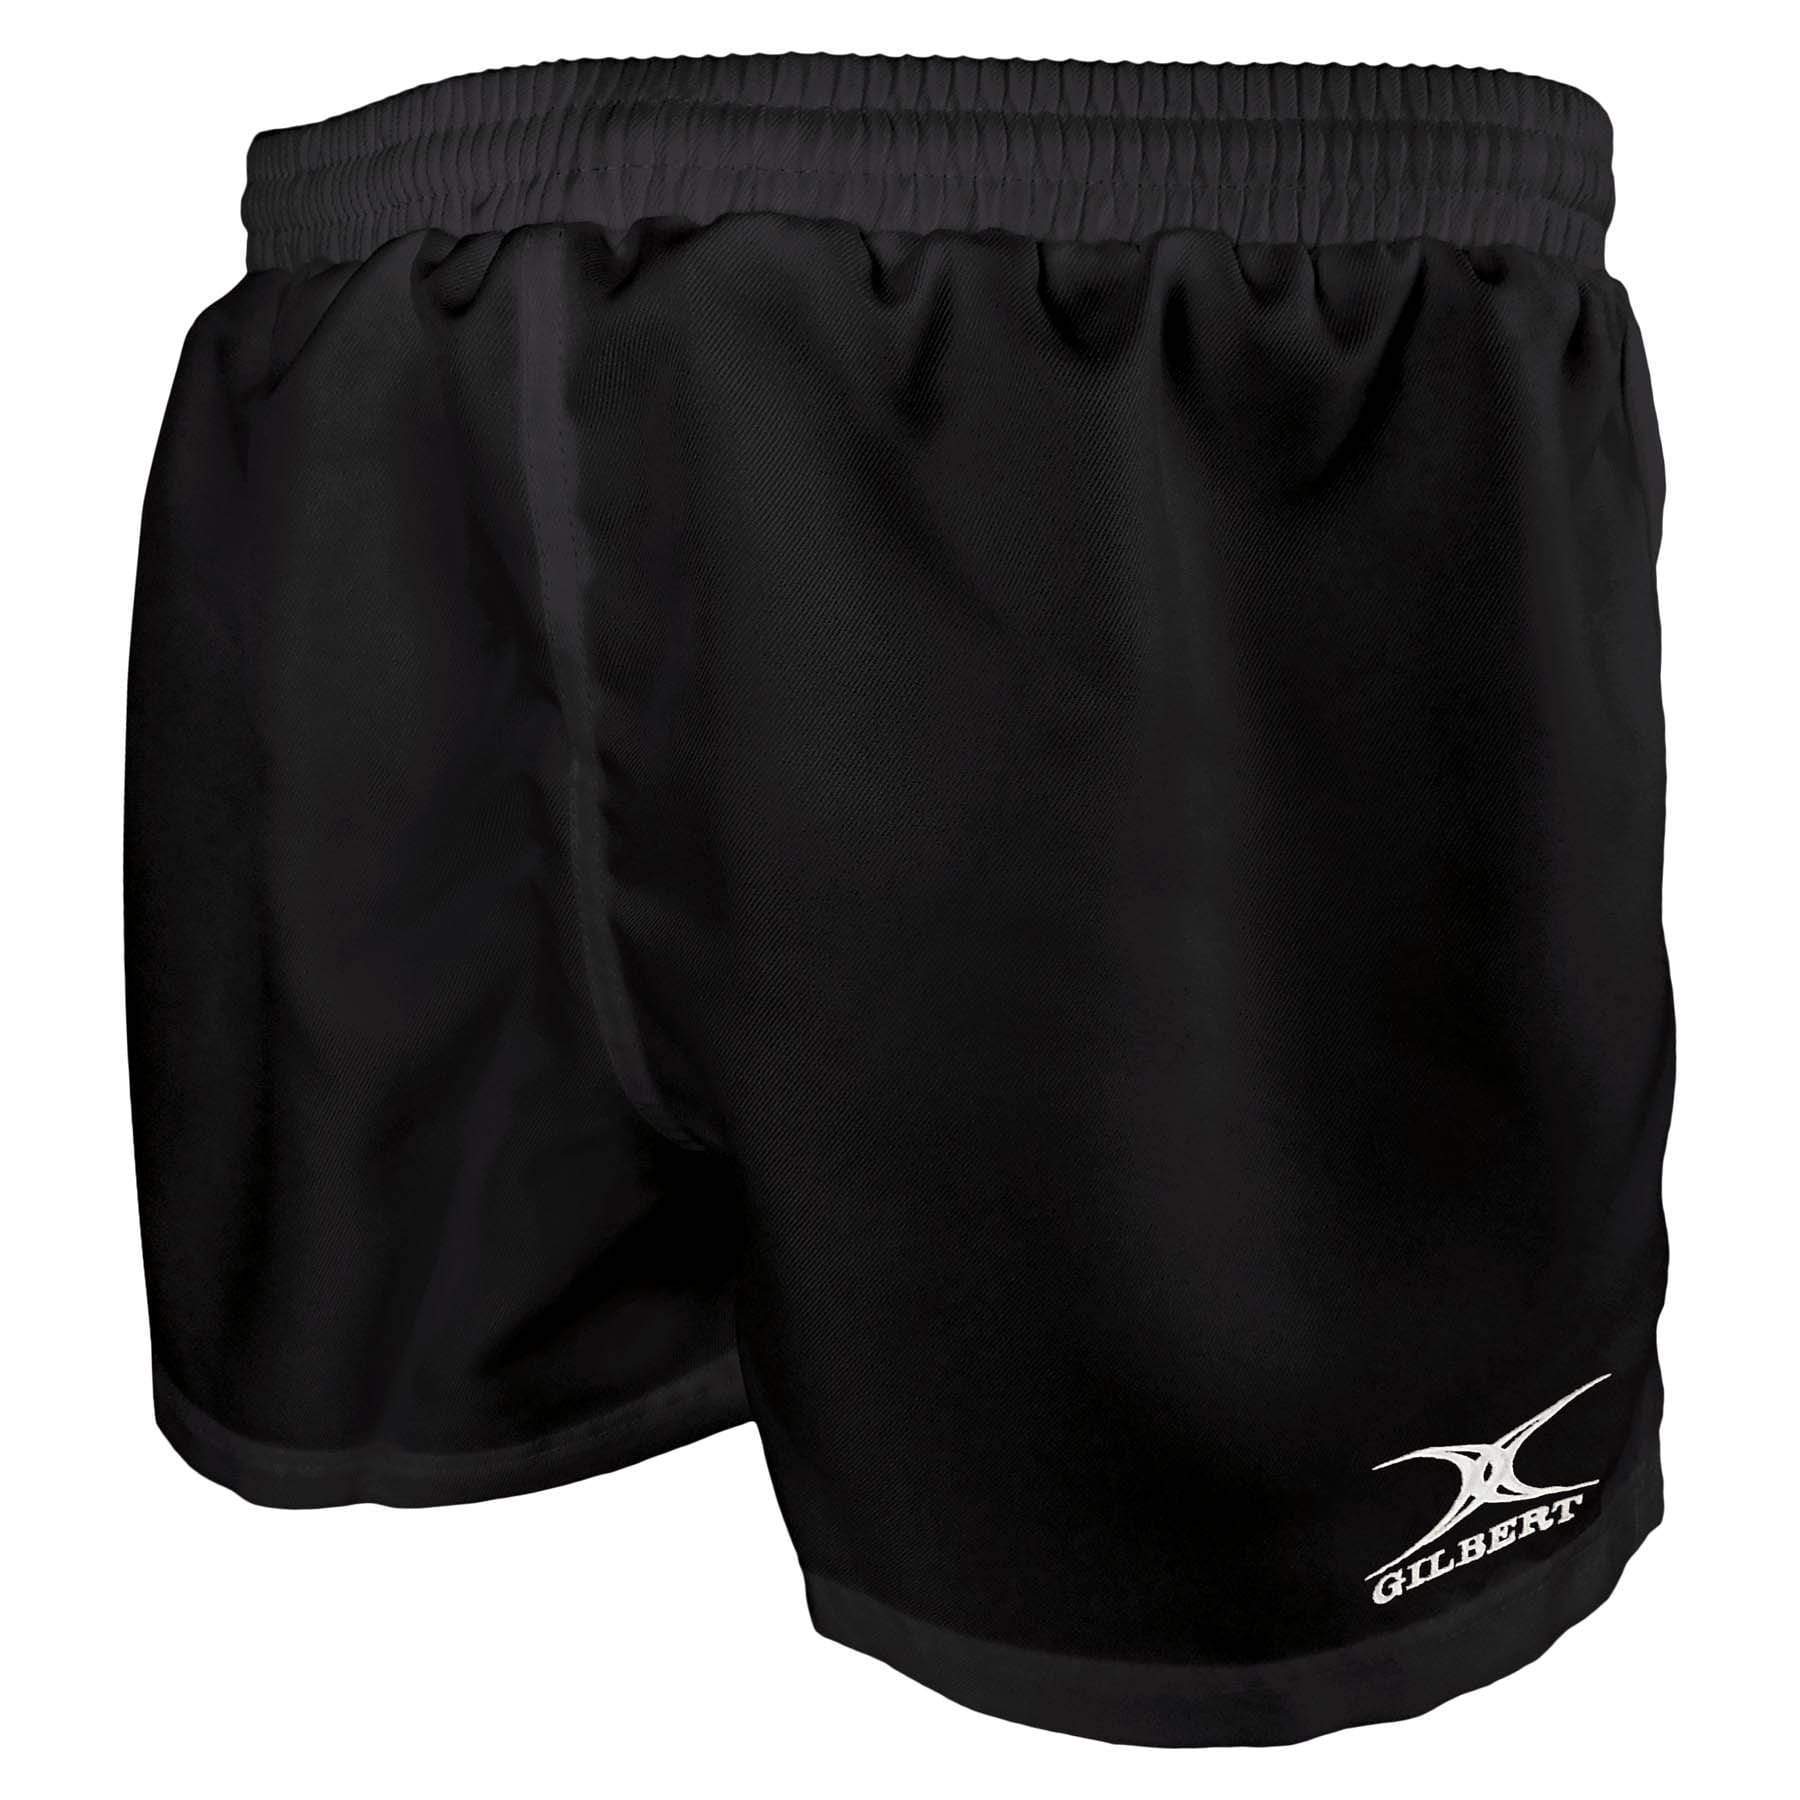 Rugby Imports Gilbert Saracen Youth Rugby Short